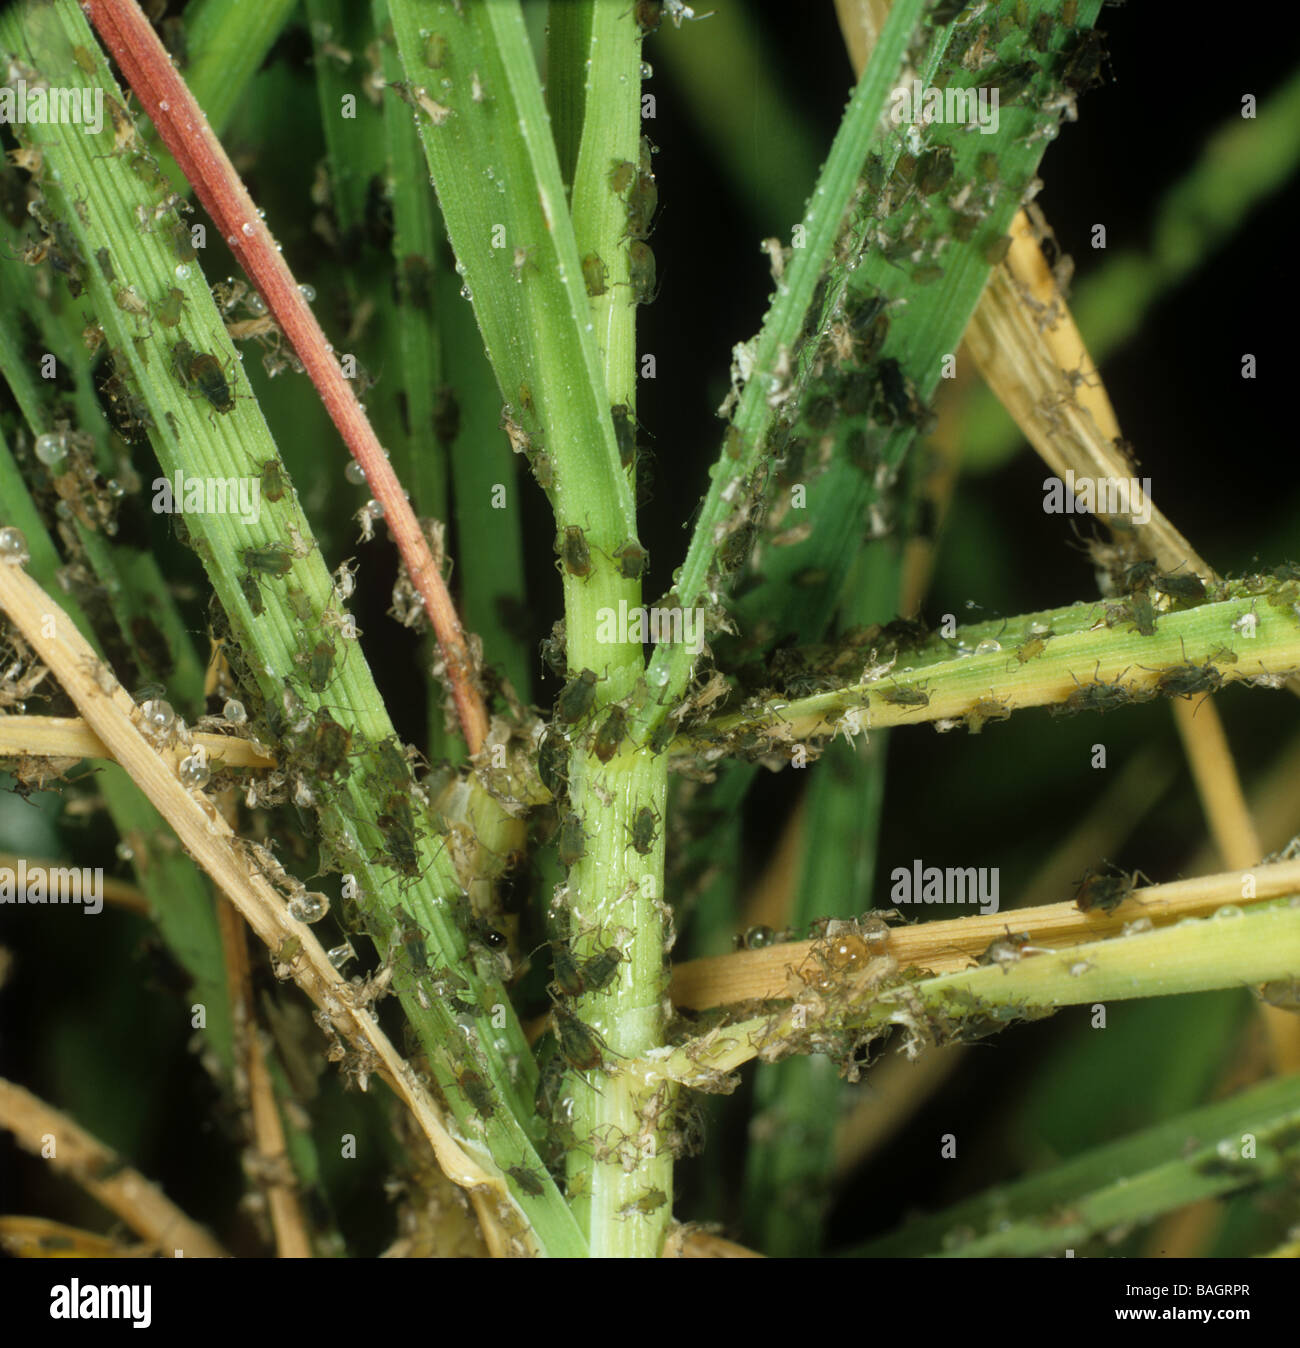 A severe infestation of bird cherry aphids Rhopalosiphum padi on a young barley plant Stock Photo